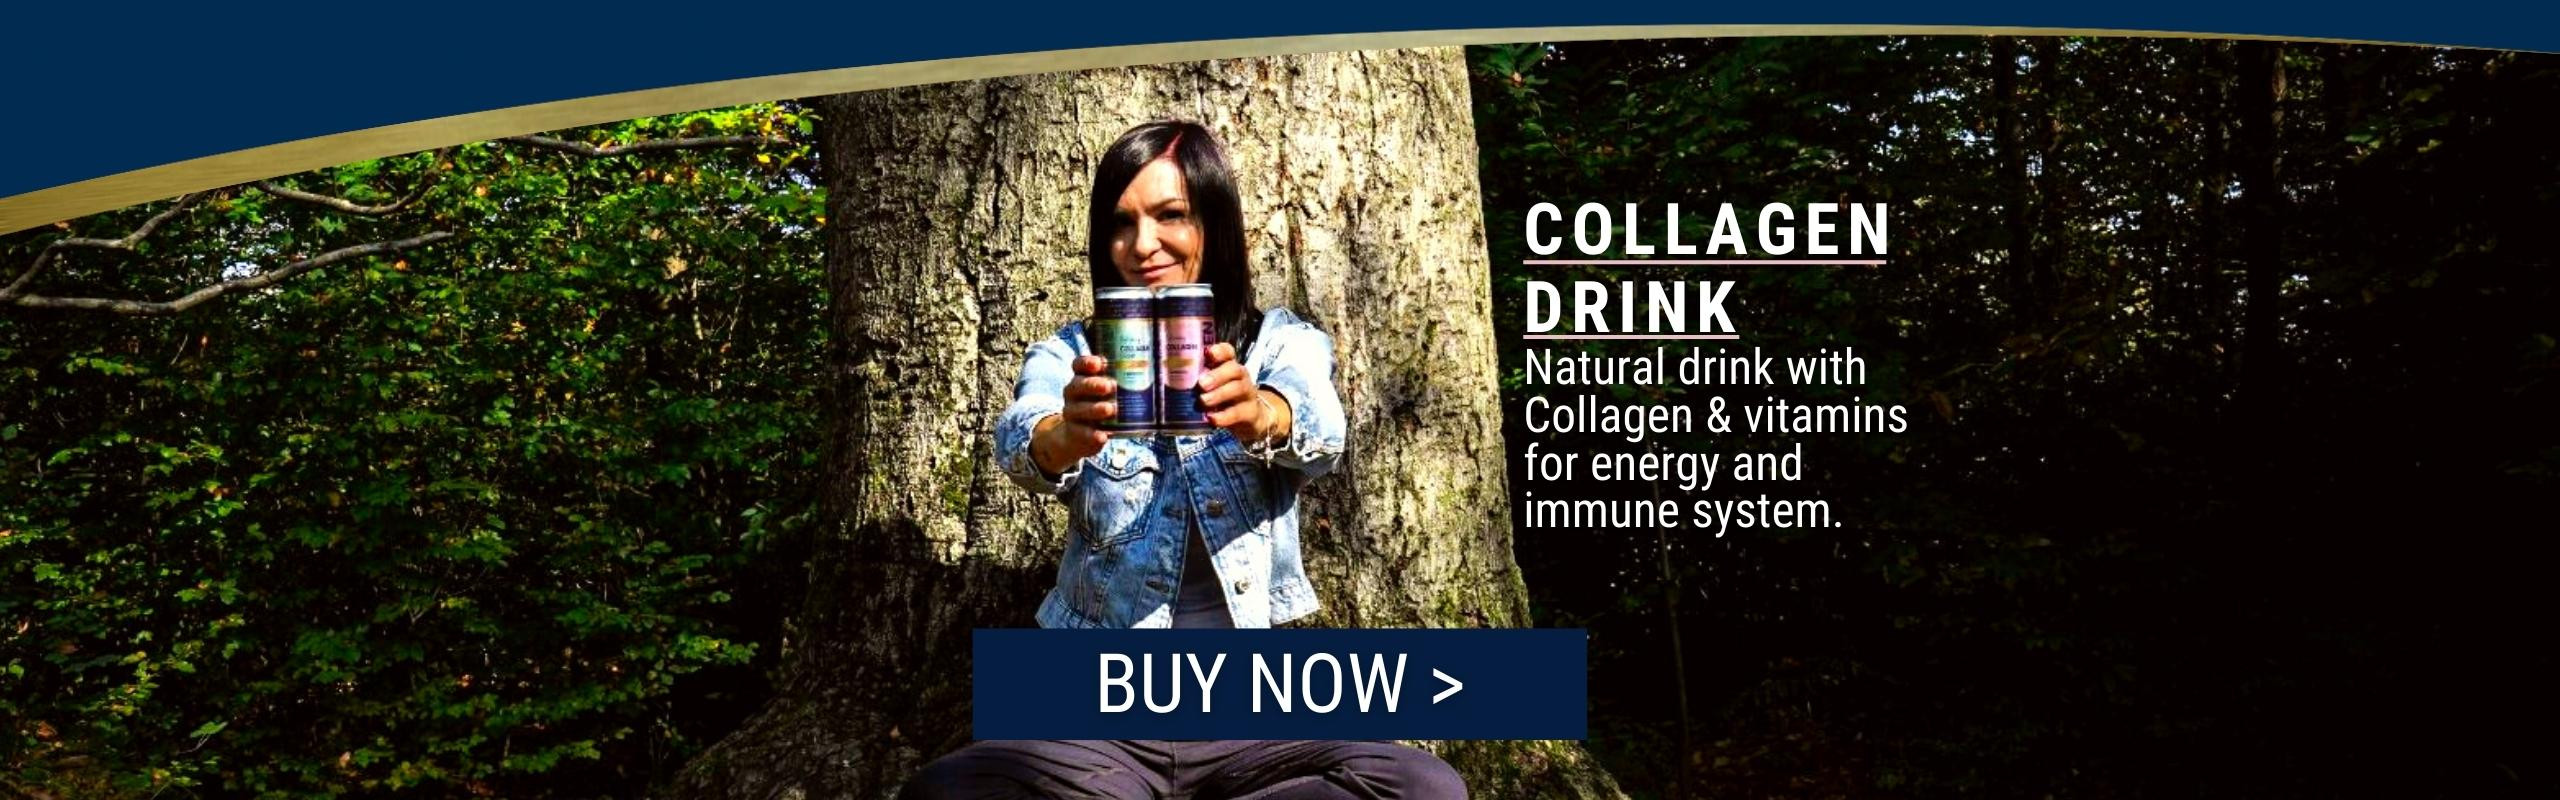 Collagen drink - Natural drink with Collagen and vitamins